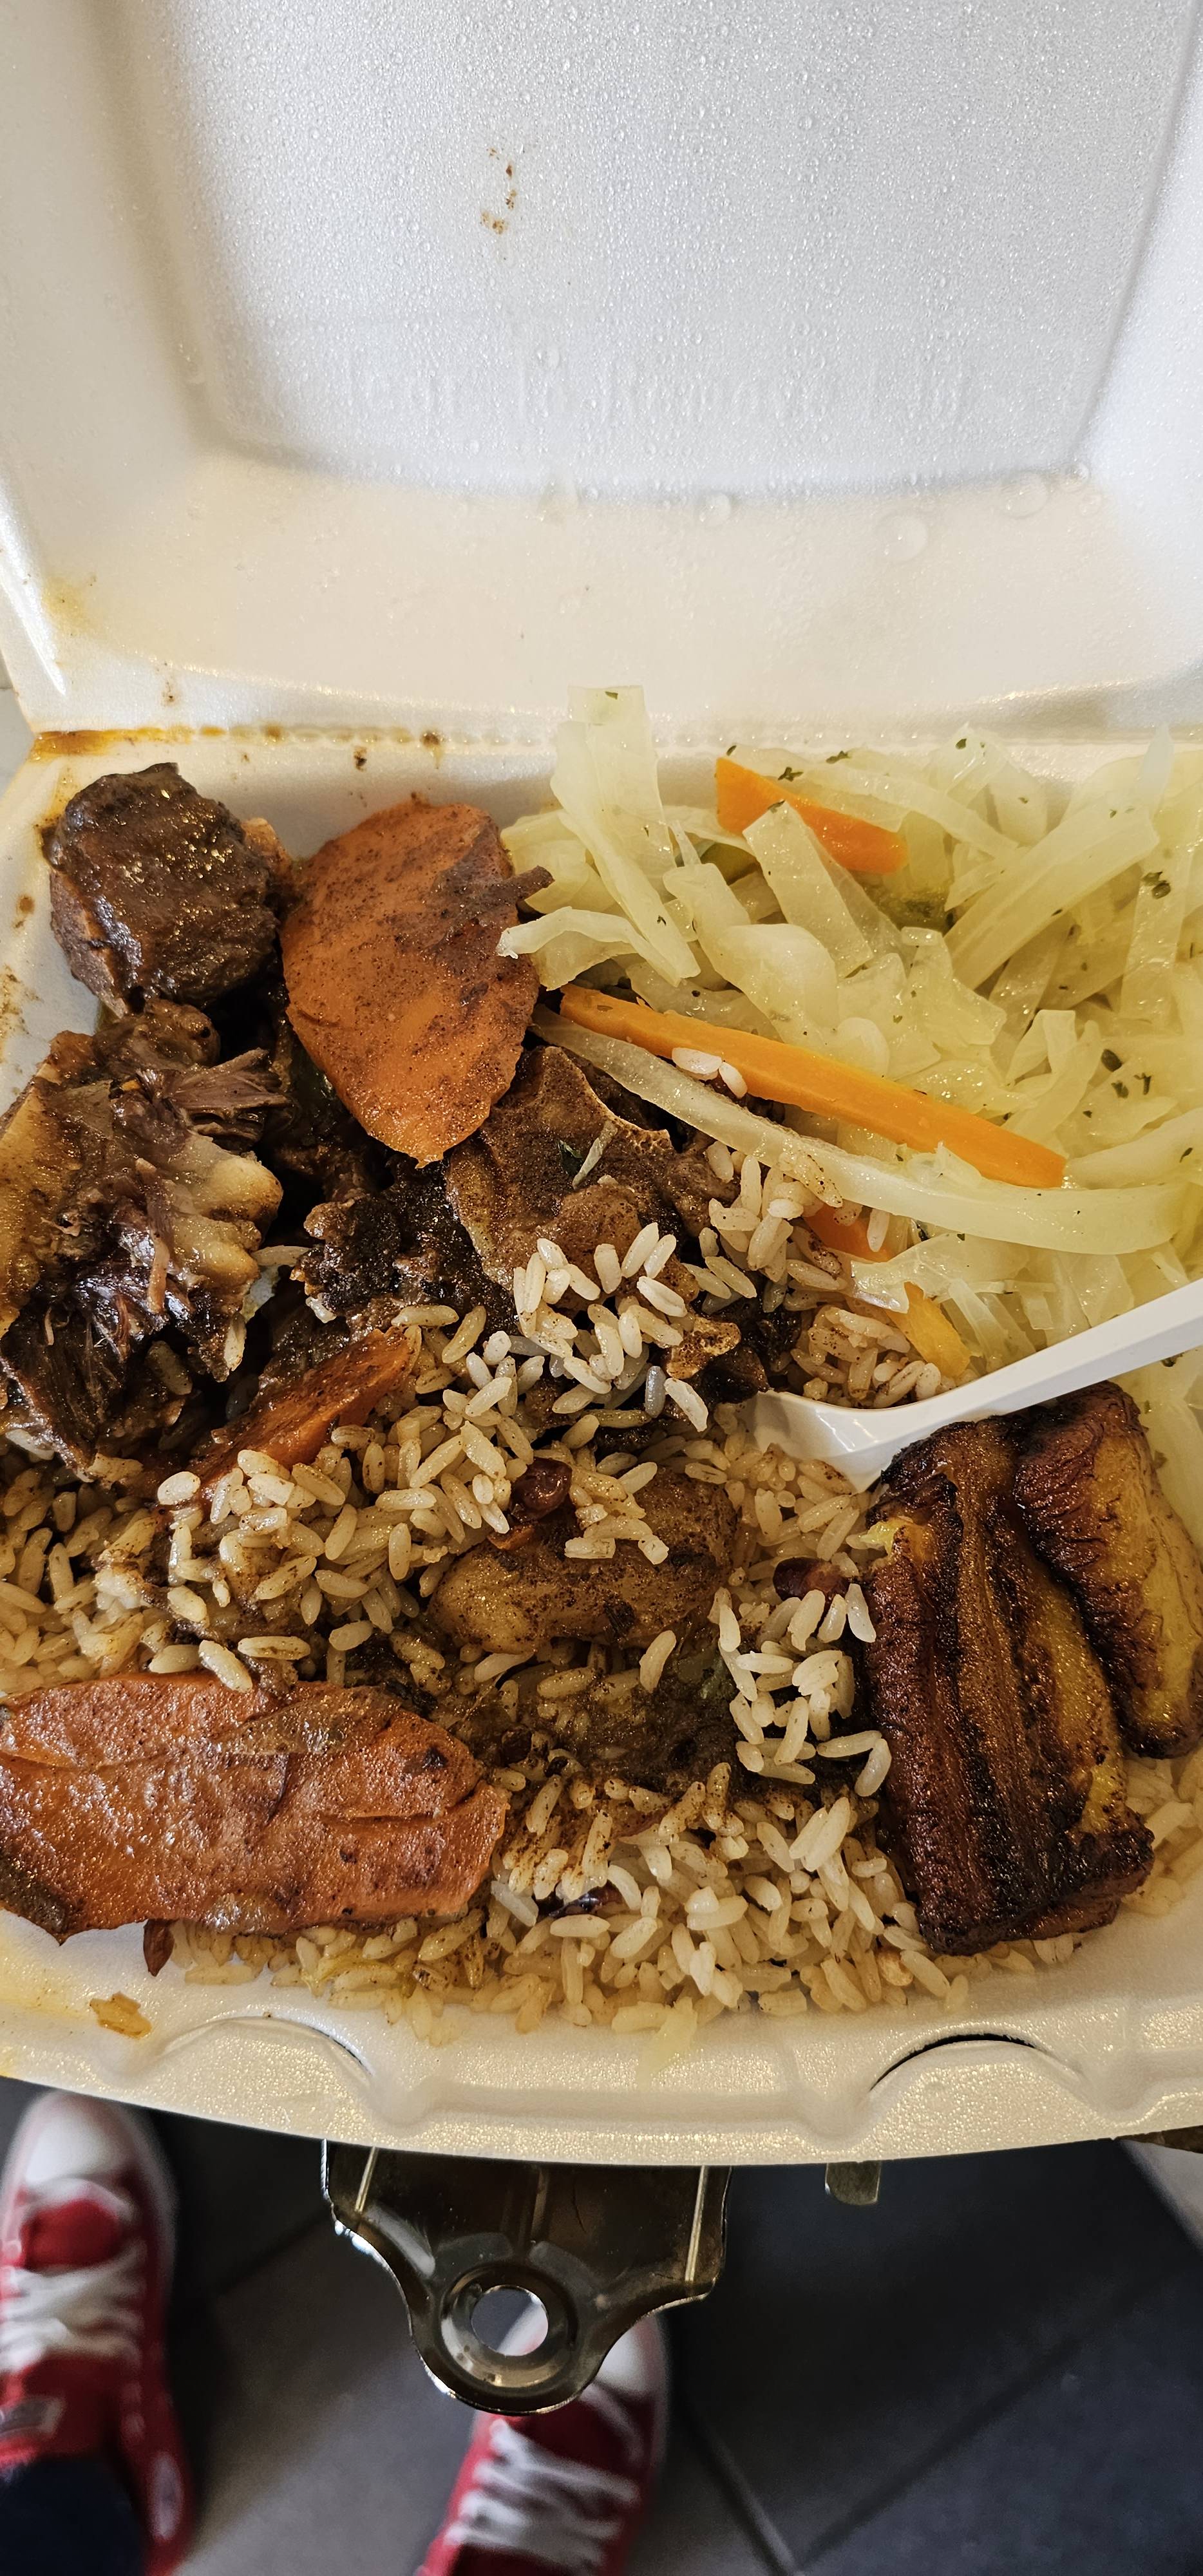 How to get to Camy's Caribbean Mart & Eatery in Lyndhurst by Bus?